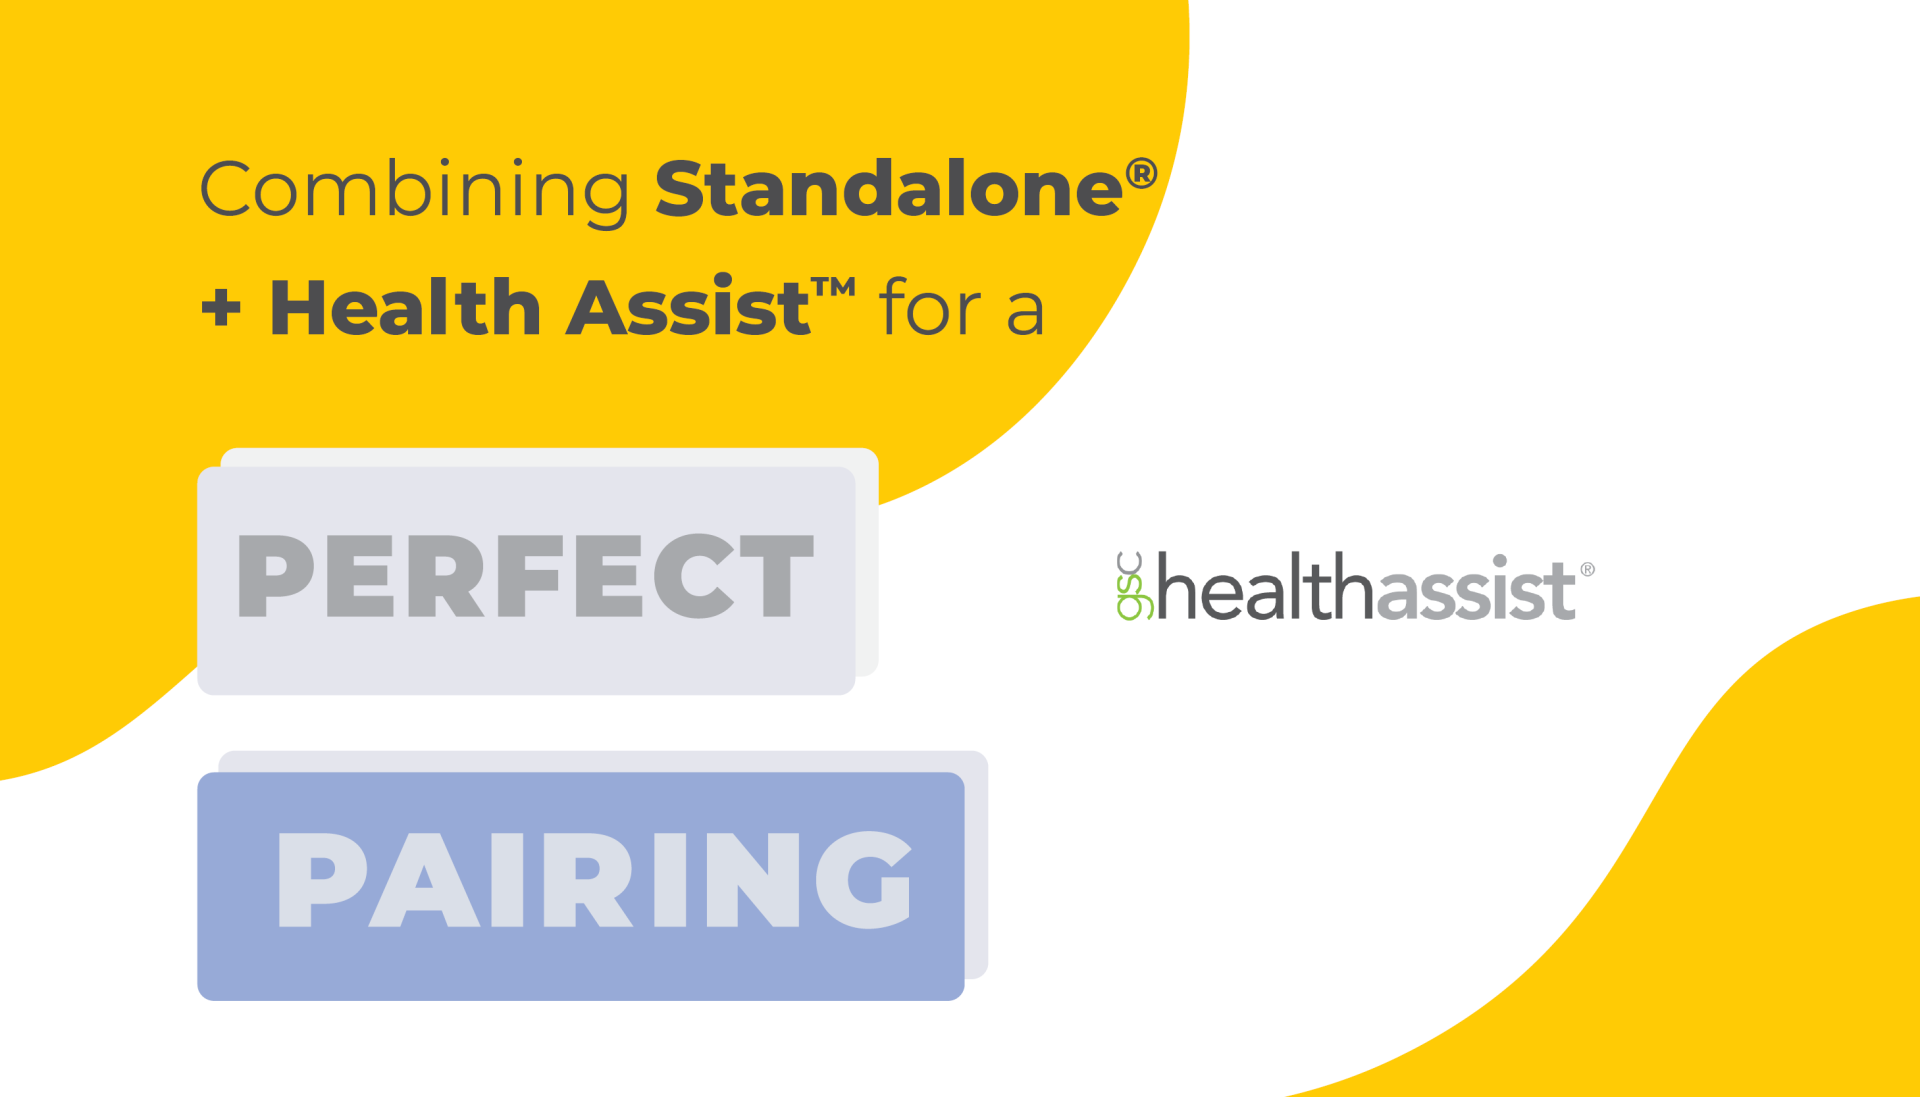 Combining Standalone and Health Assist for a Perfect Pairing